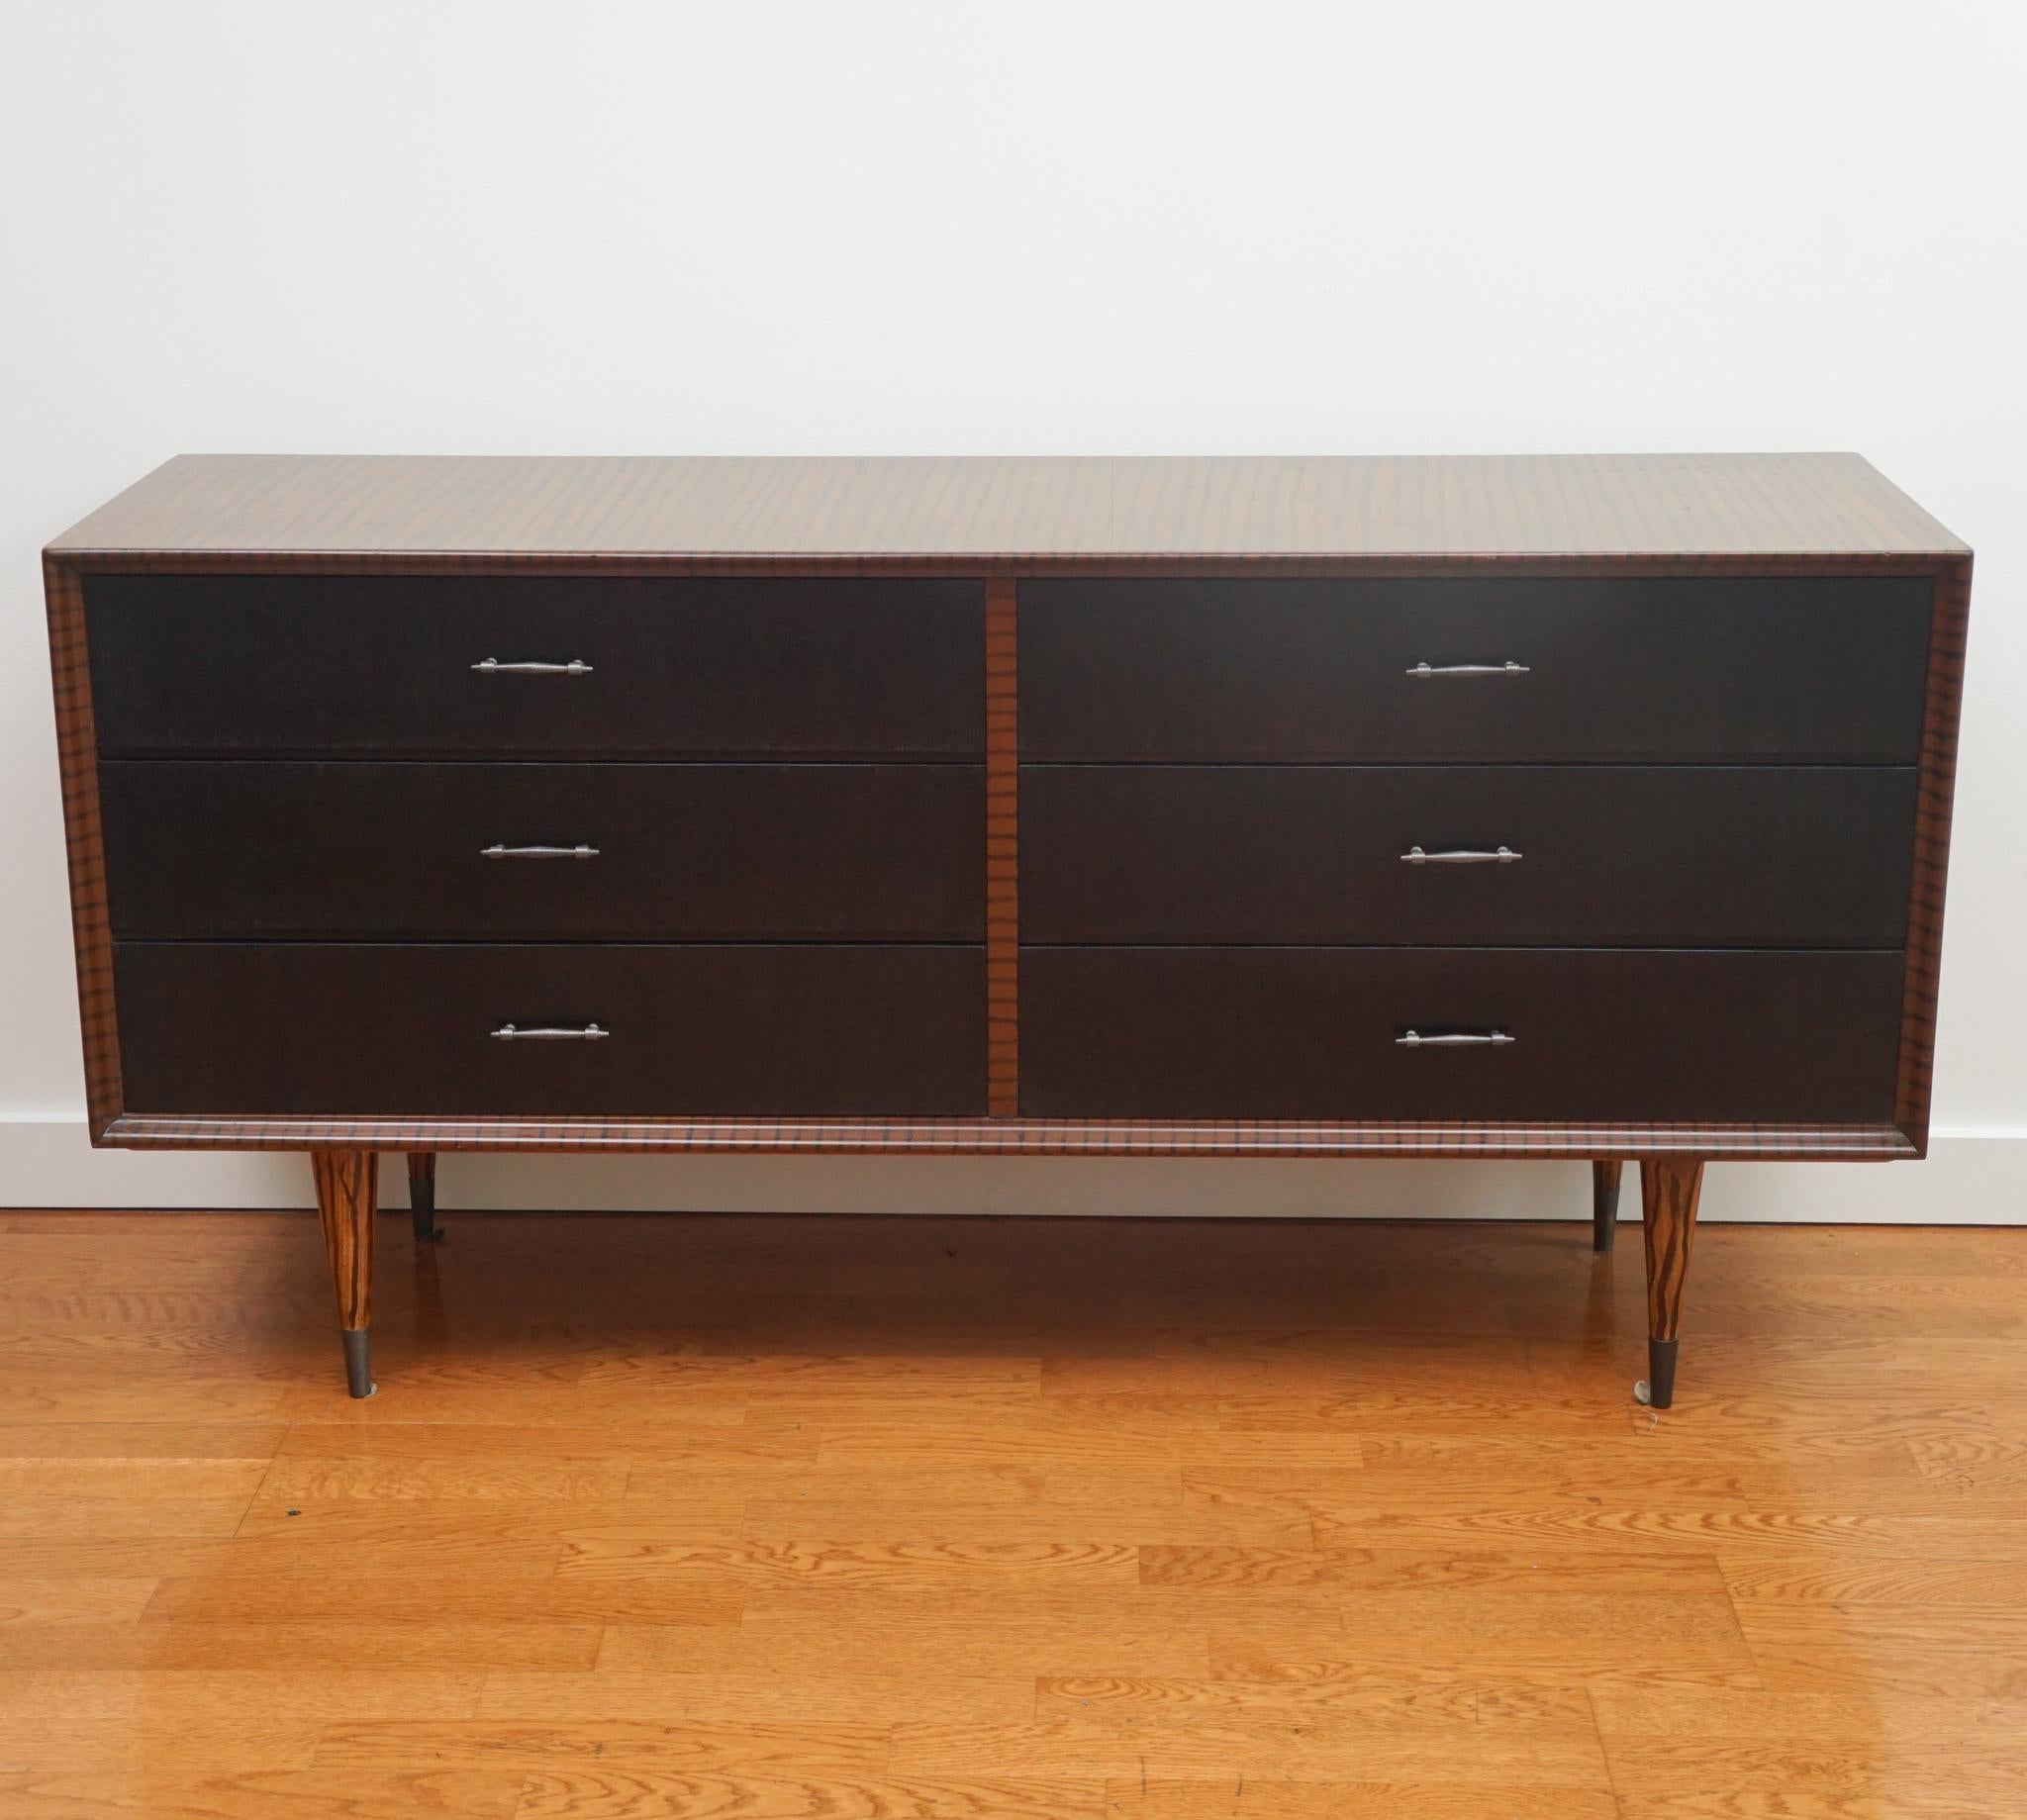 The faux zebra wood mid-century dresser, shown here, has been beautifully restored.  Featuring six generous-sized drawers, the exotic zebra-patterned finish is made even more dramatic with black painted drawer fronts and modern silver pulls.   Circa